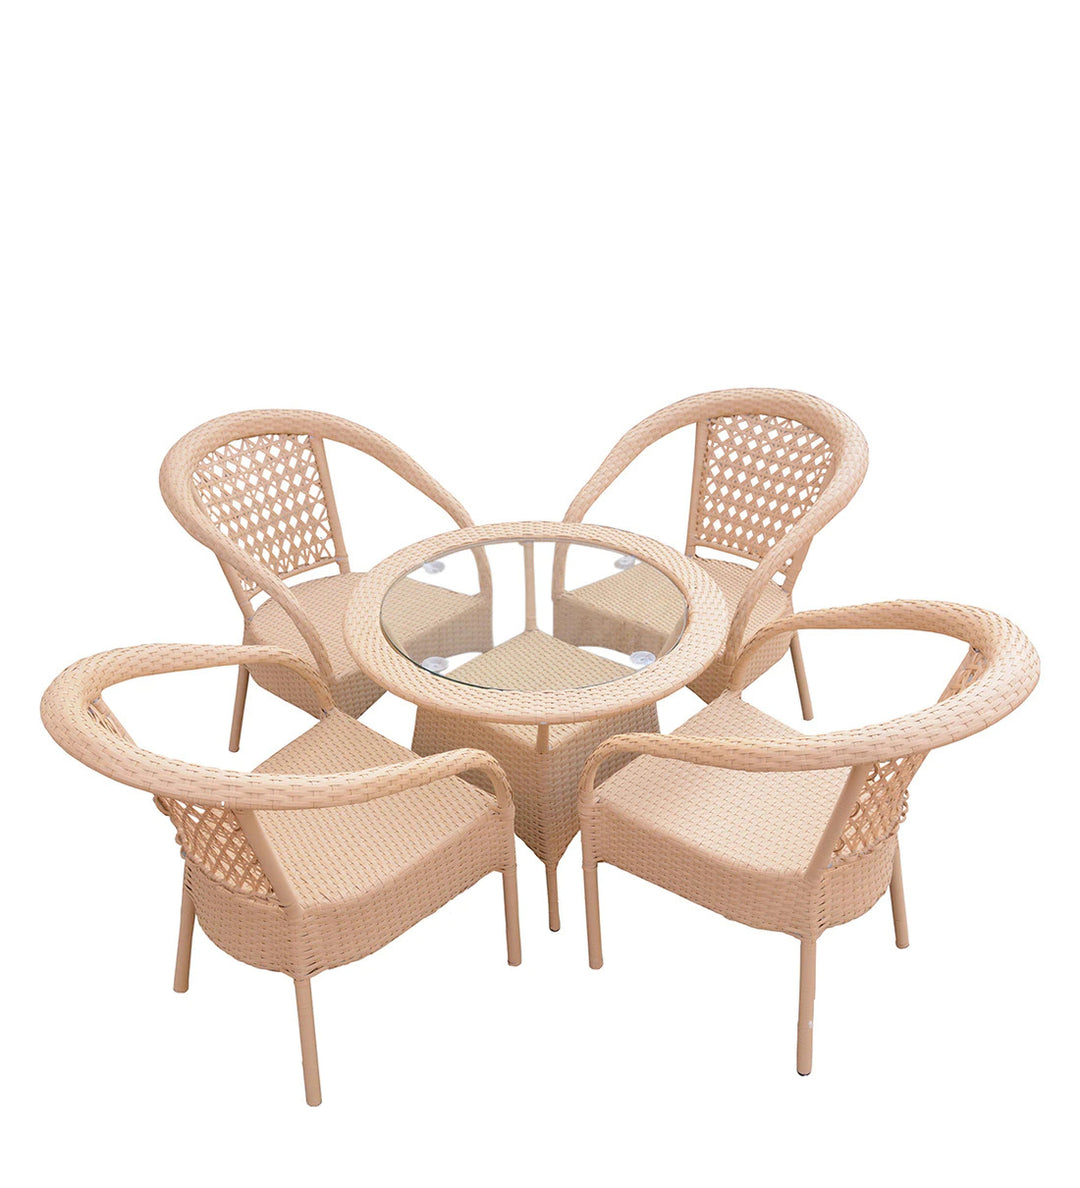 Dreamline Outdoor Furniture Garden Patio Seating Set 1+4 4 Chairs and Table Set Balcony Furniture Coffee Table Set